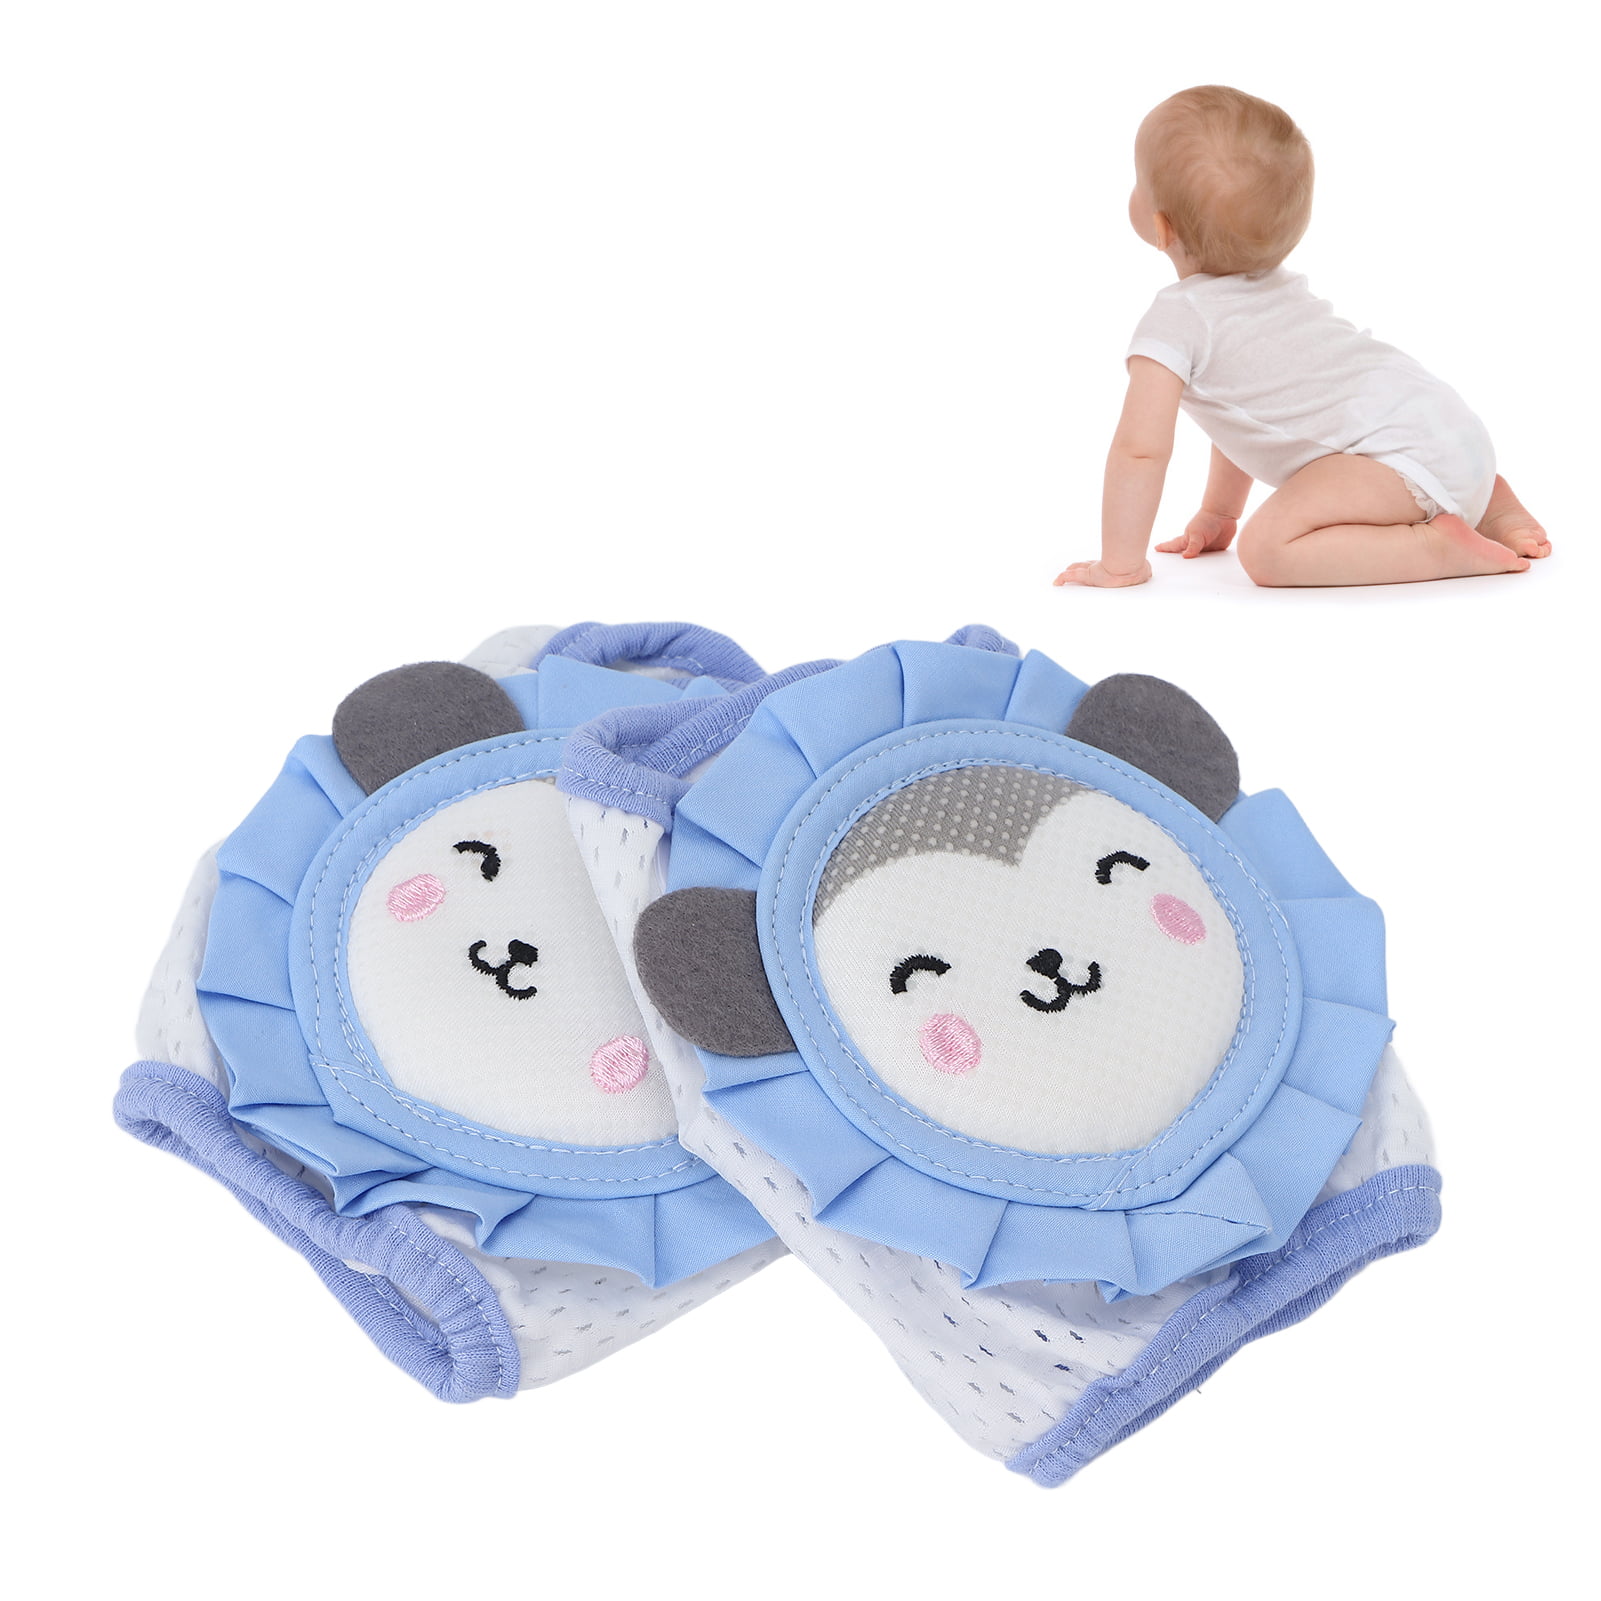 R SODIAL Infant Toddler Baby Knee Pad Crawling Safety Protector Blue 